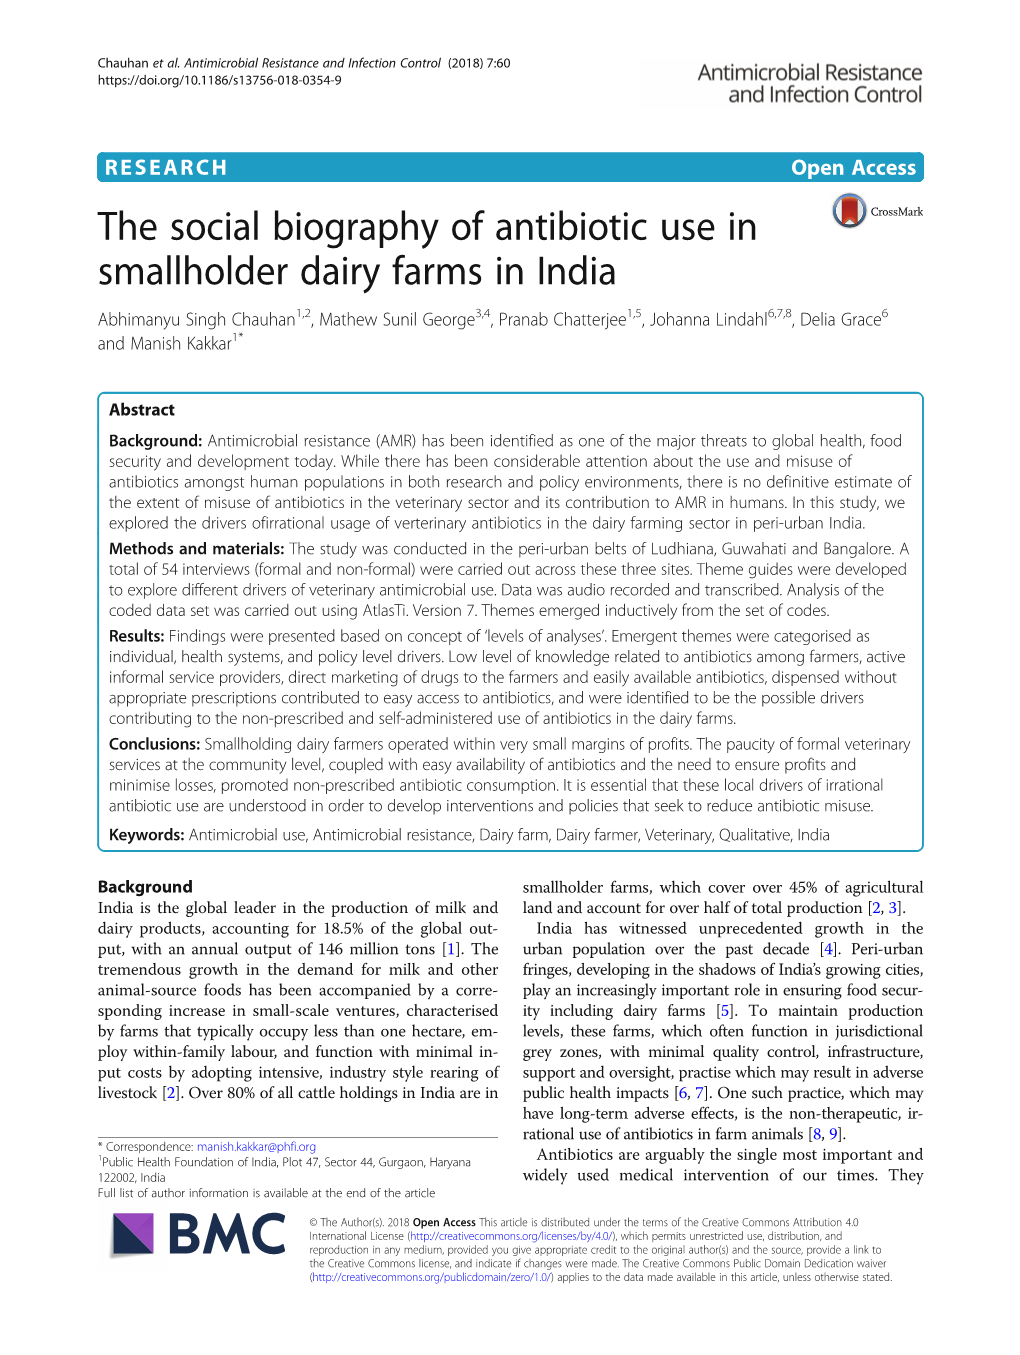 The Social Biography of Antibiotic Use in Smallholder Dairy Farms in India